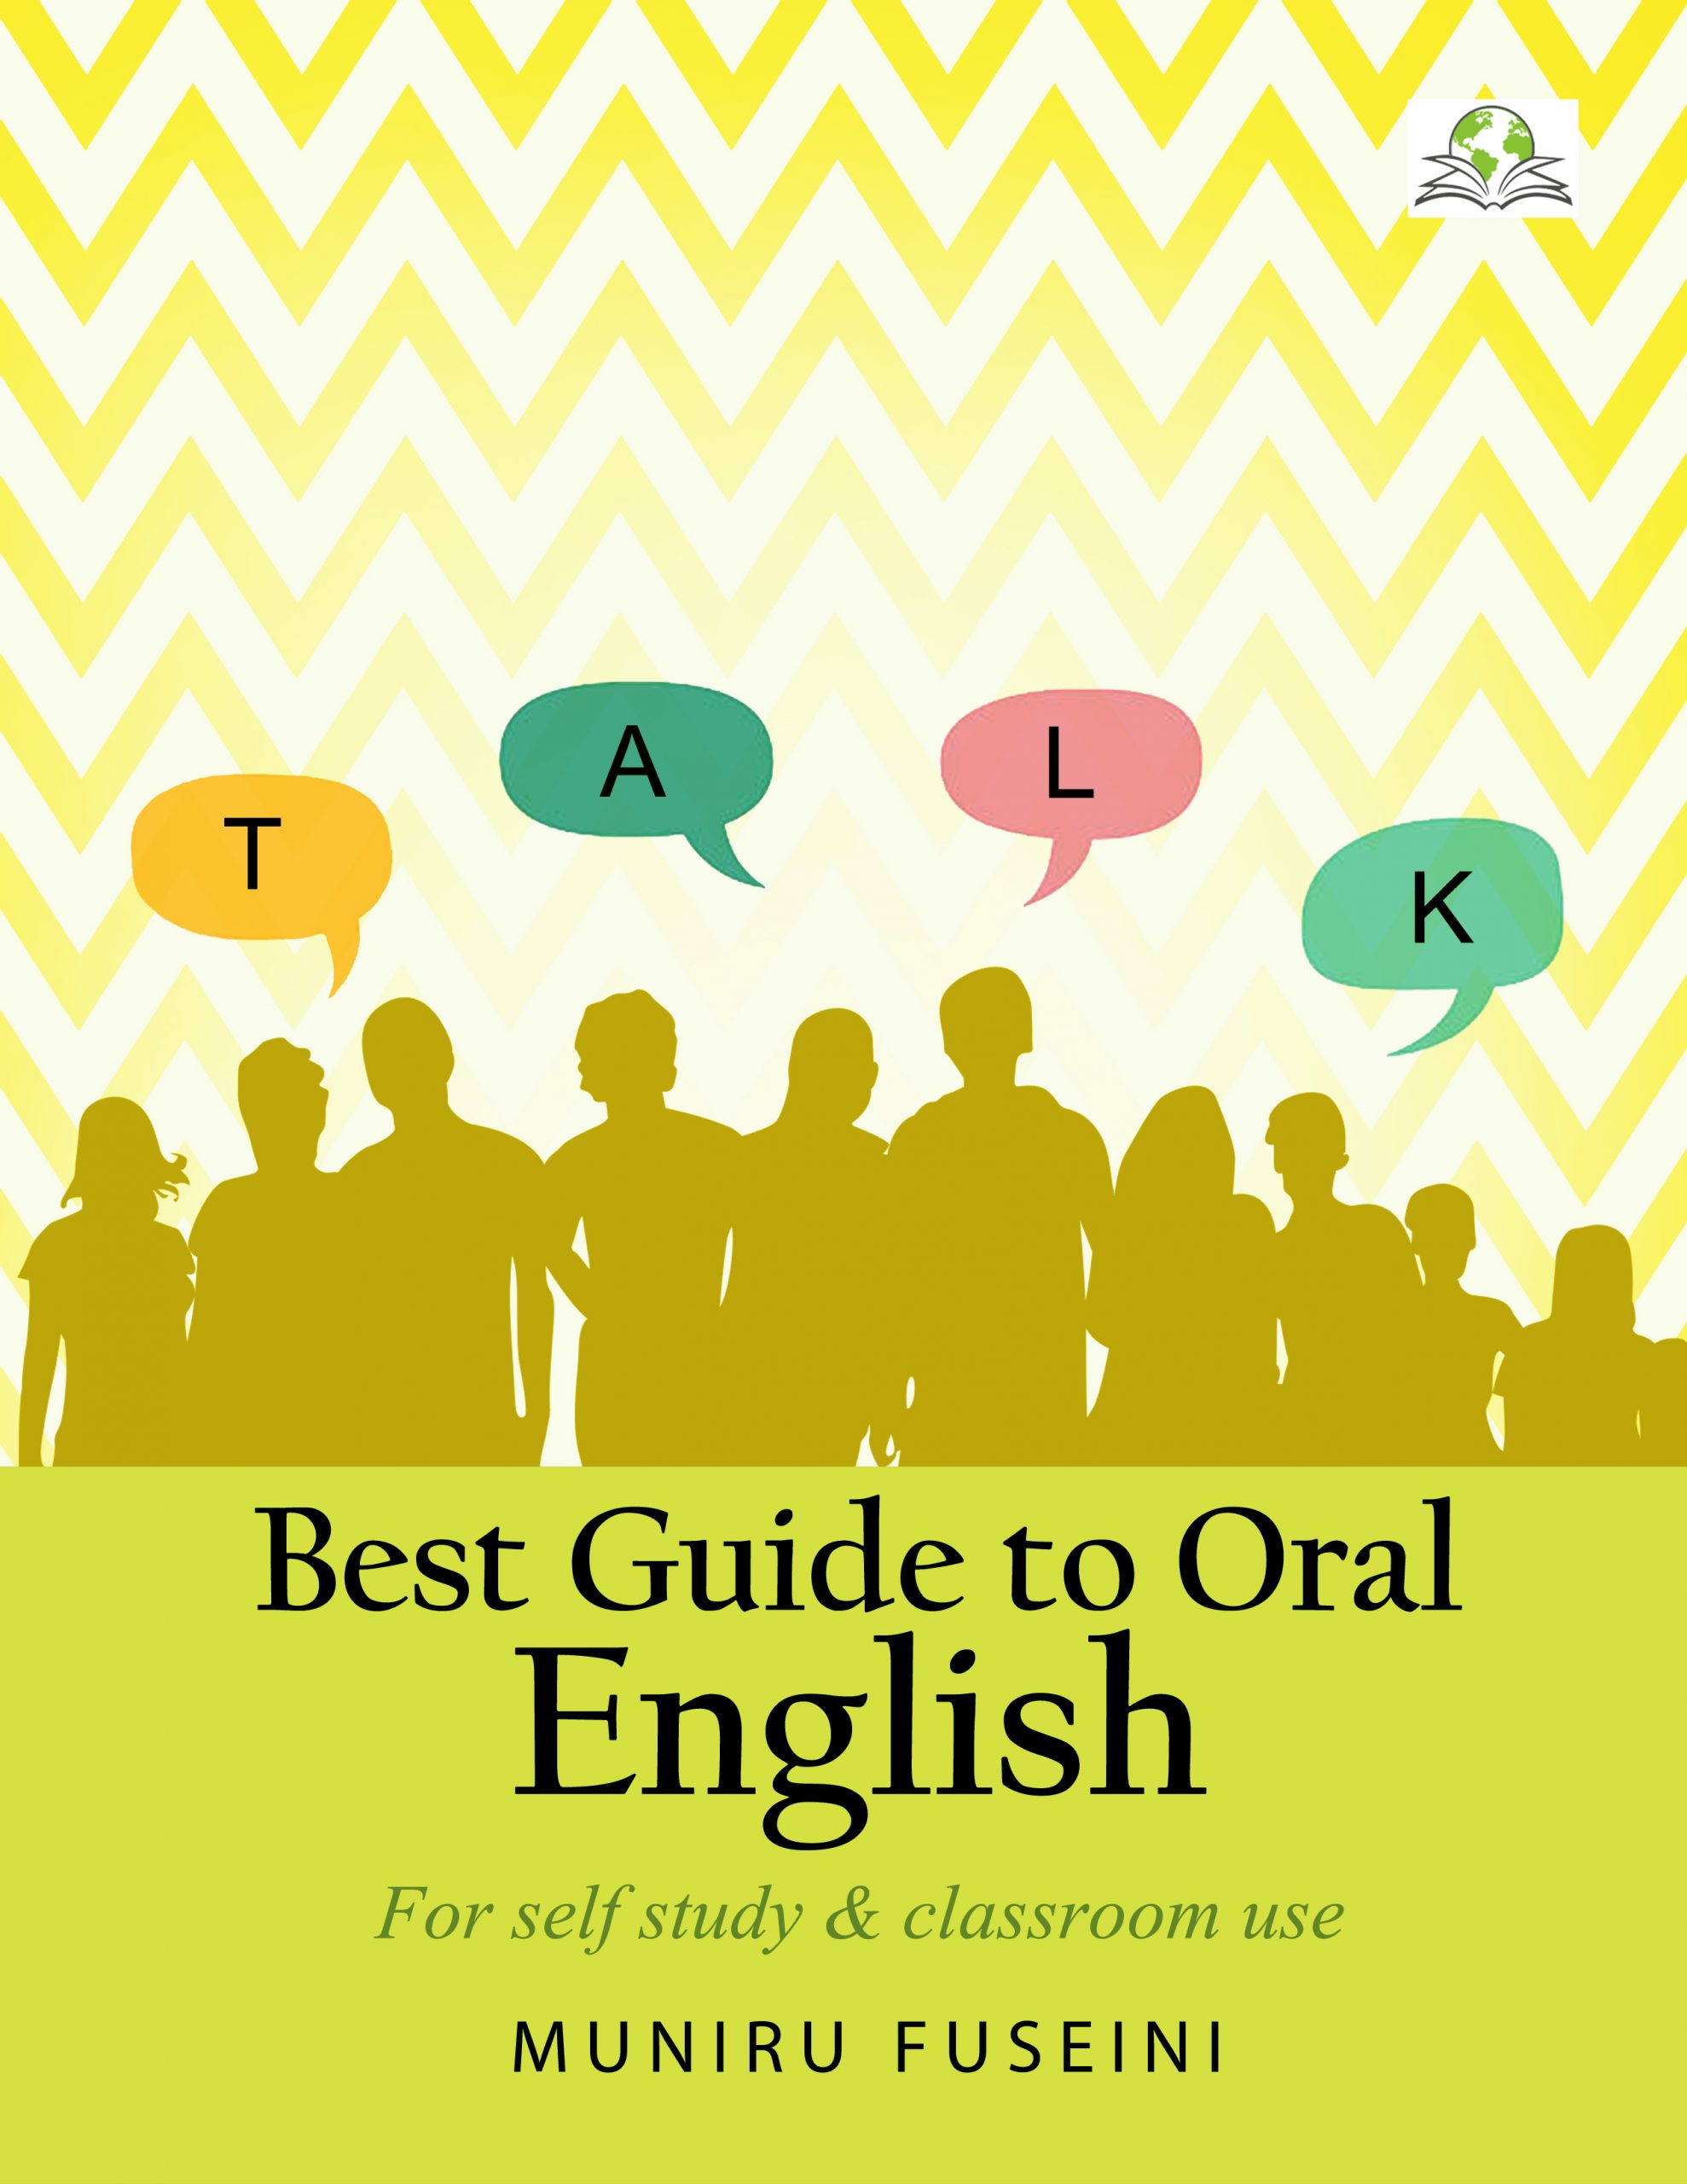 Exceller　to　Oral　Guide　For　English:　Use　and　Classroom　Self-study　Best　Books